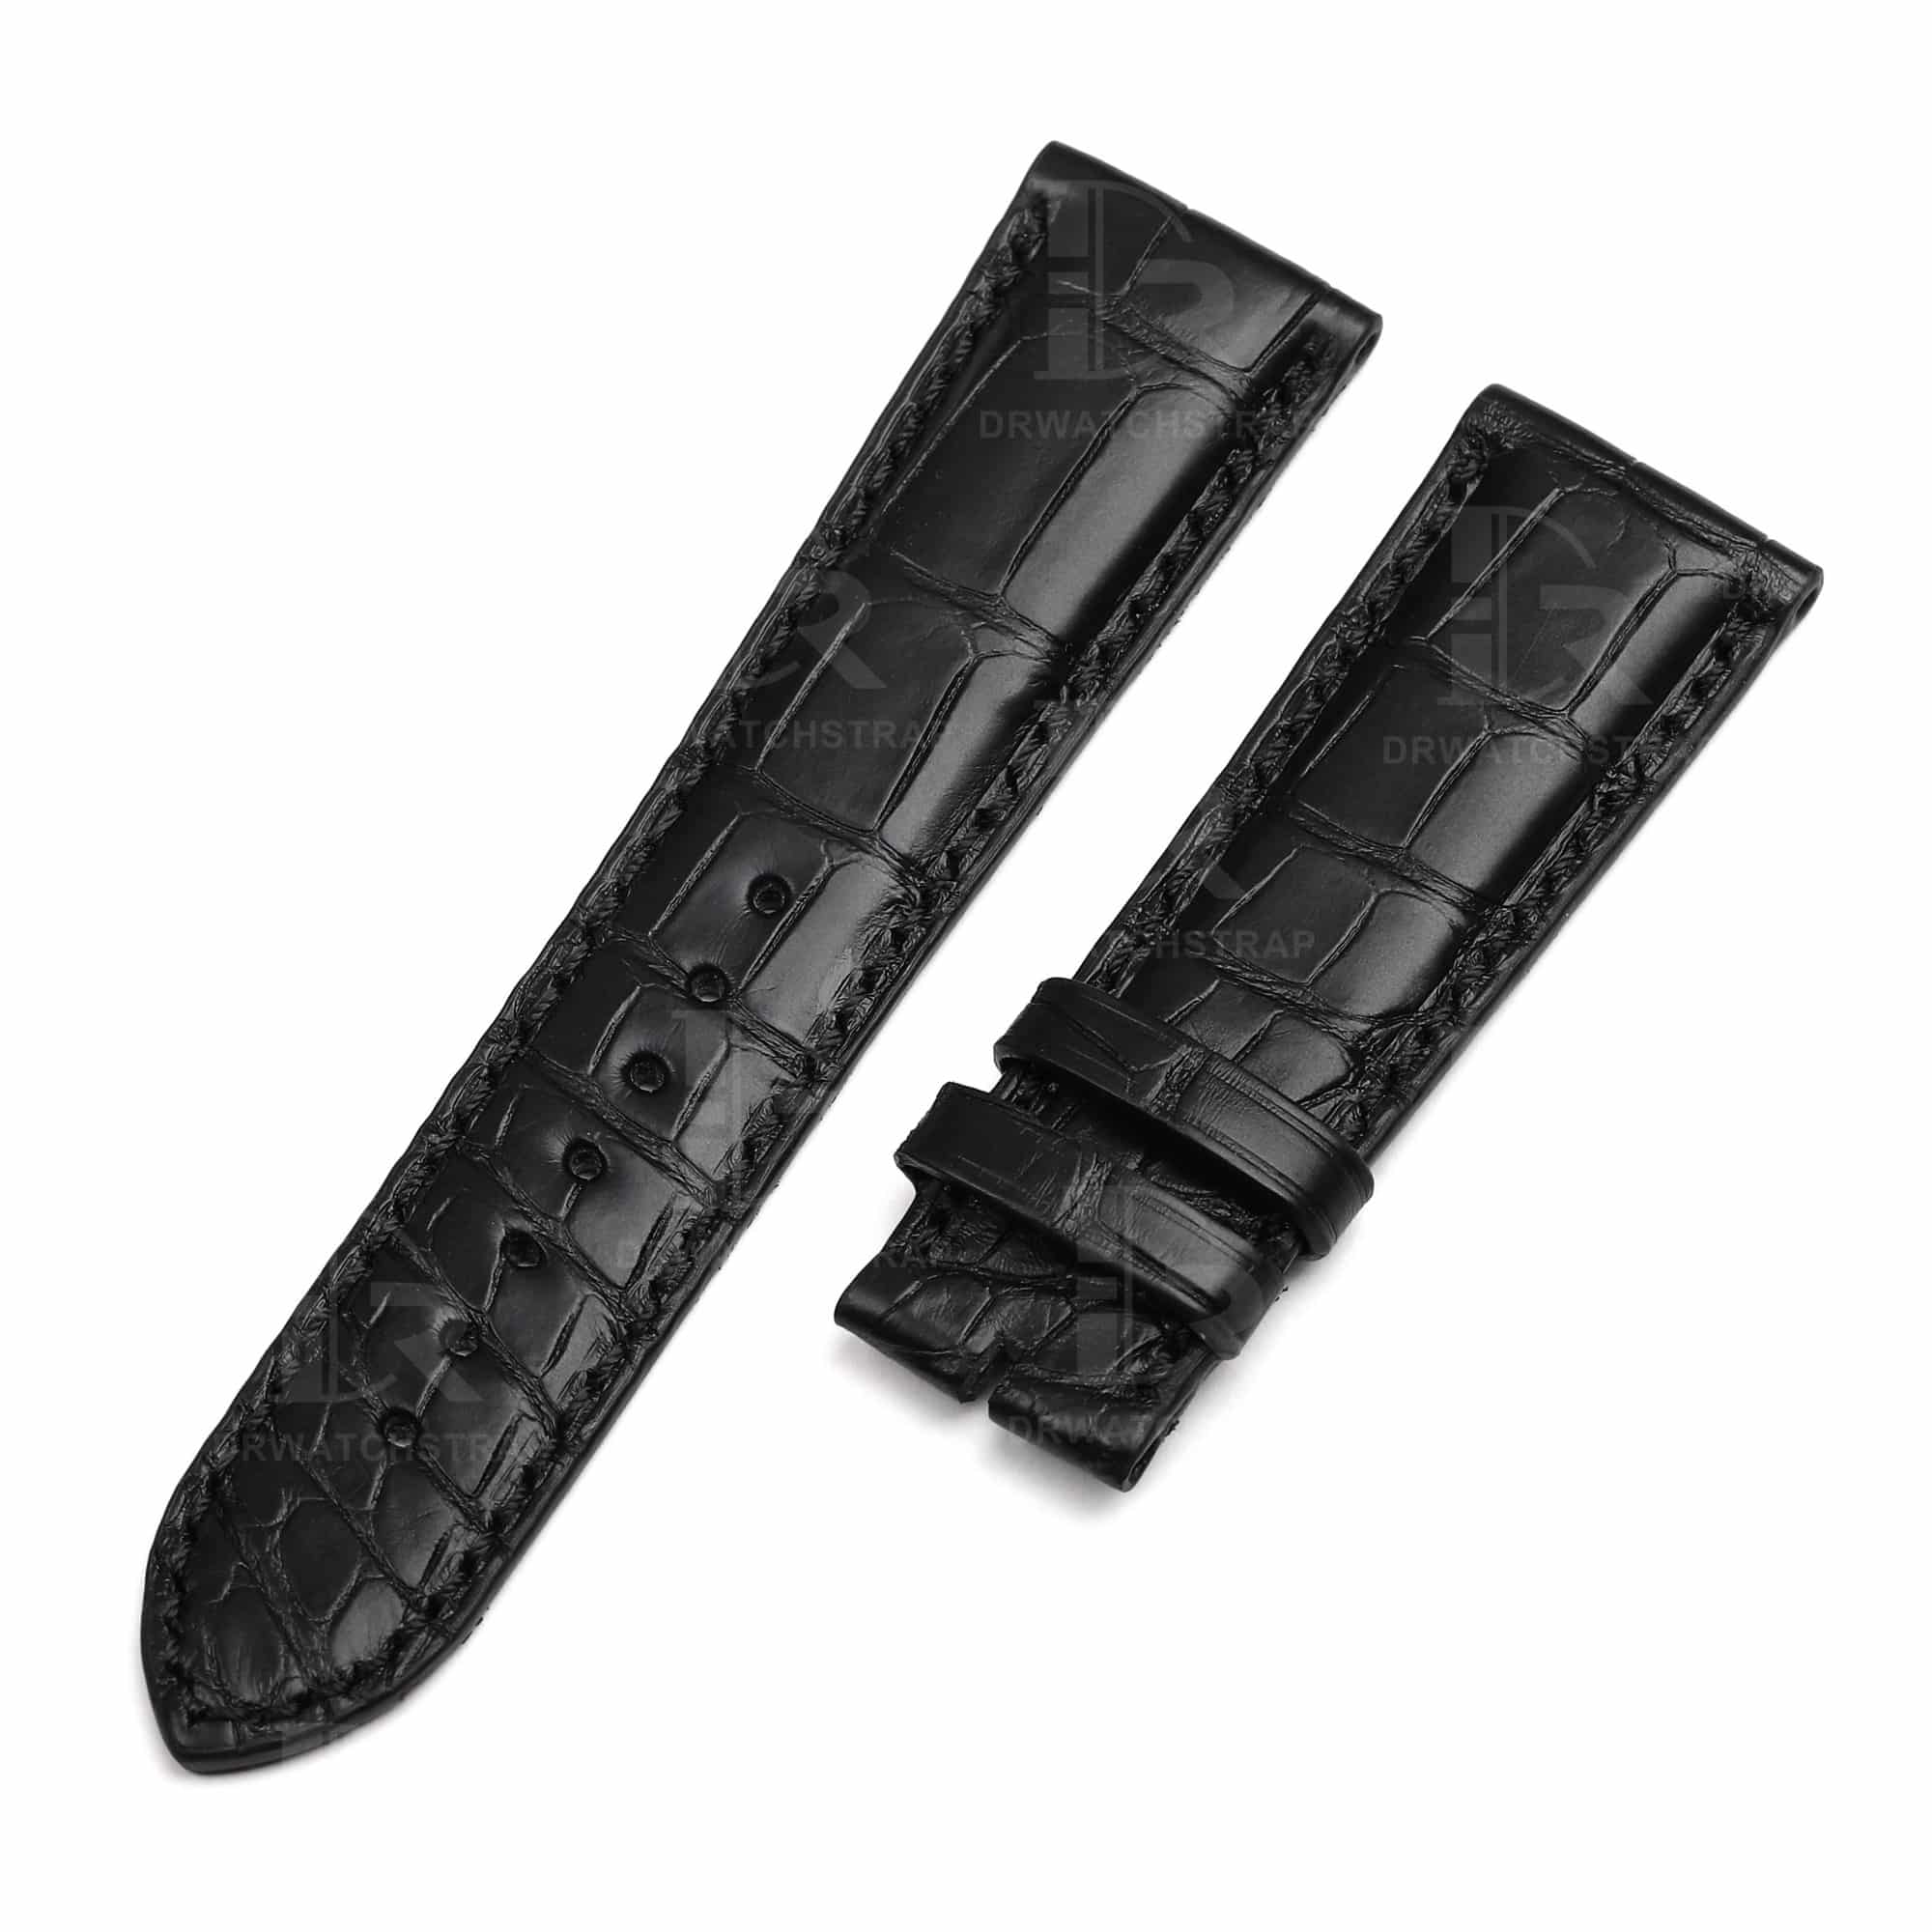 Buy Custom Zenith ELITE ACADEMYEL PRIMERO Black Leather Strap 19mm 20mm 21mm 22mm Replacement for watchband (1)